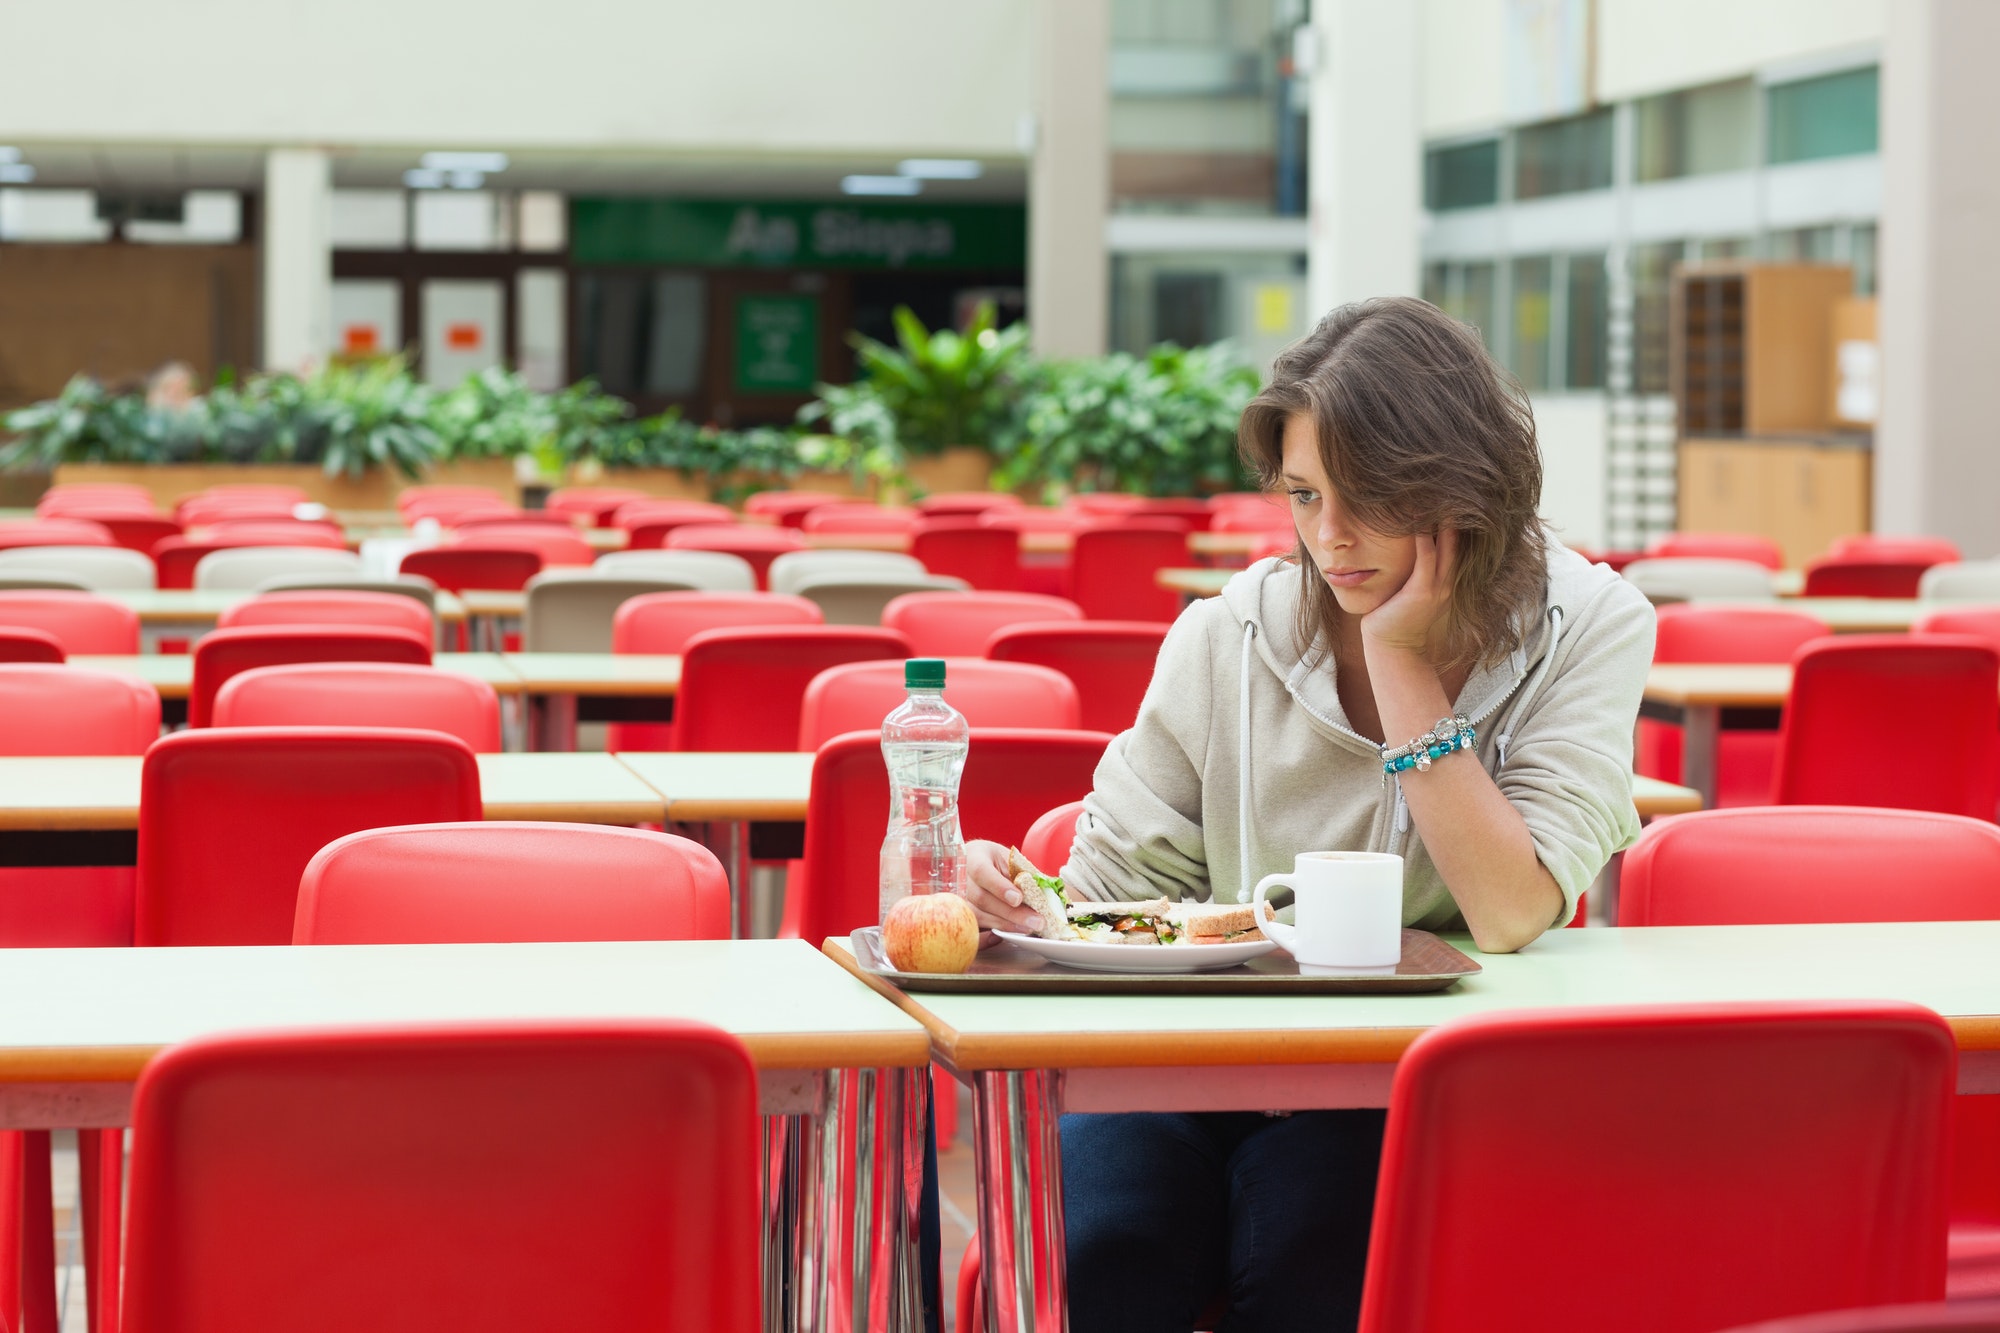 alone and sad female student sitting in the cafeteria with food tray